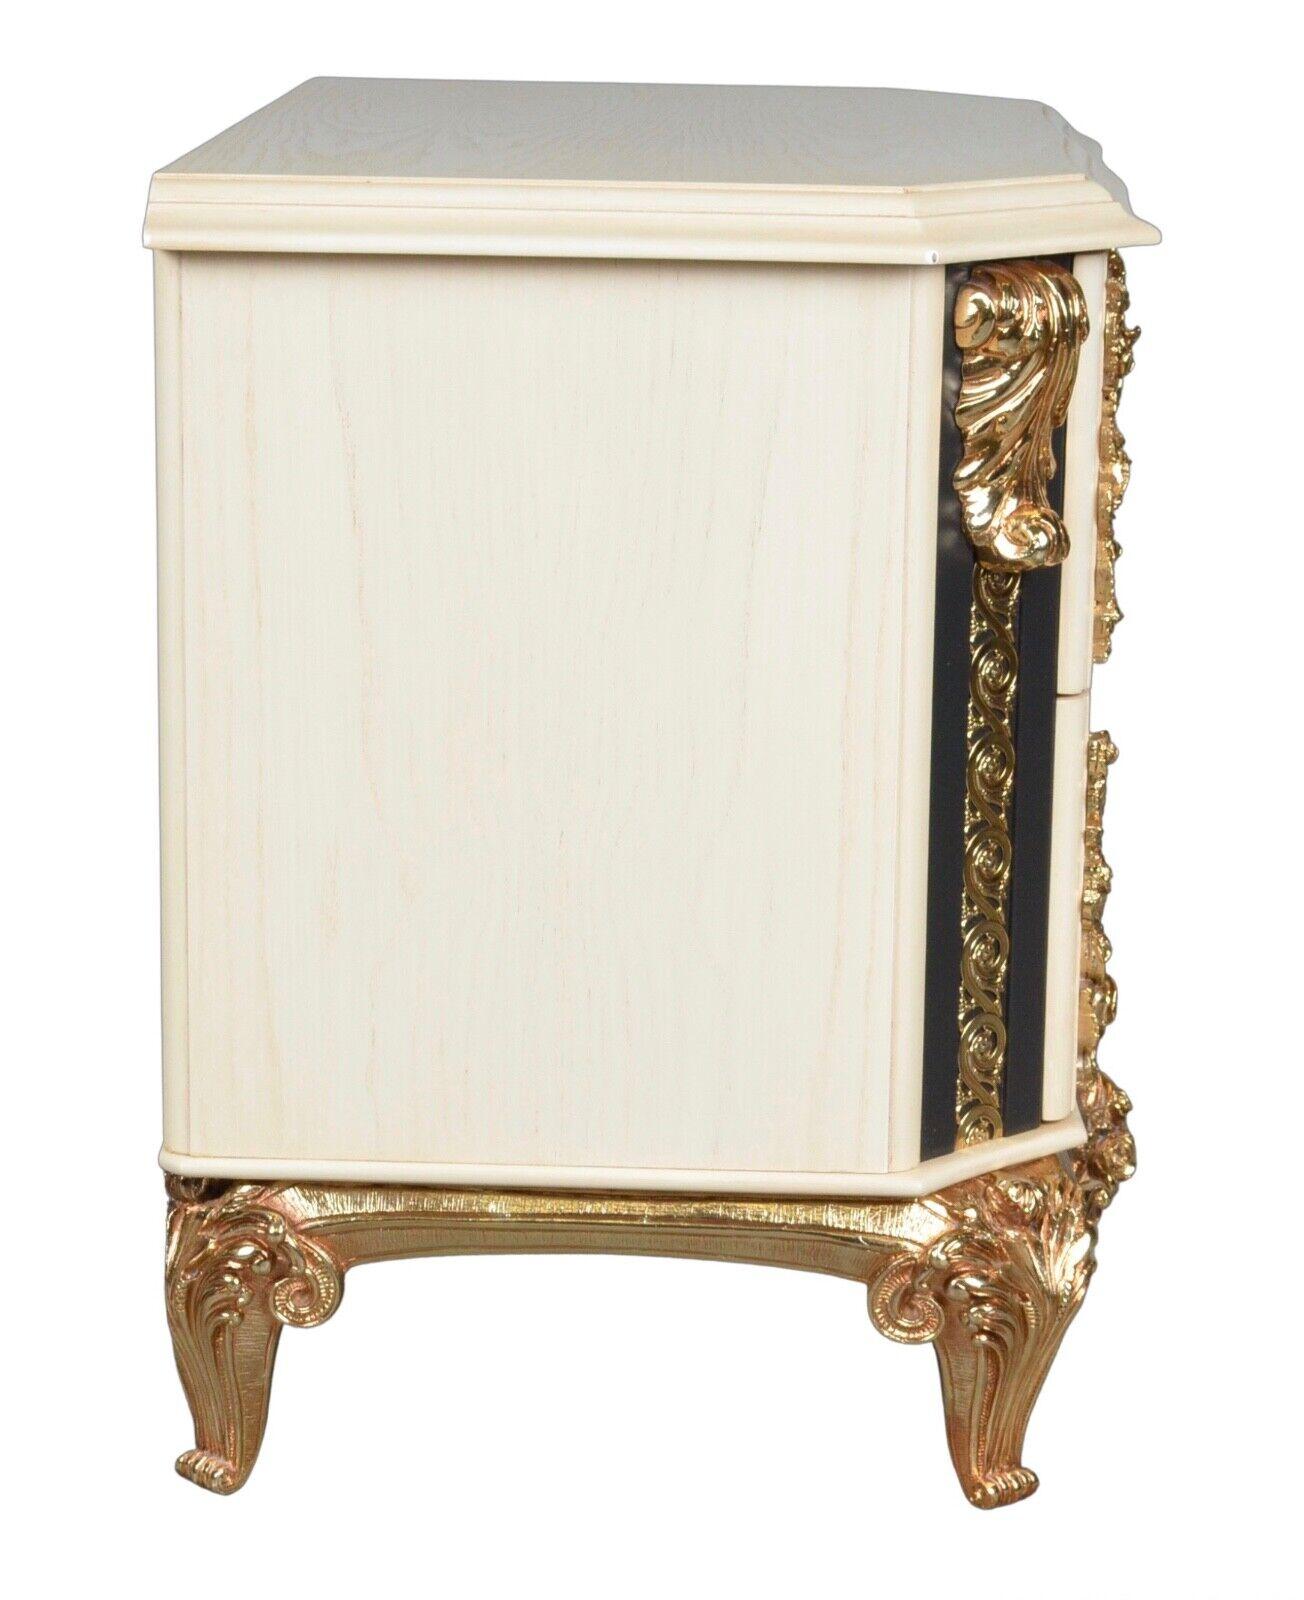 Rococo Exclusive Pair of Vidal Grau Bedside Tables, C1970 /Matching Furniture Available For Sale